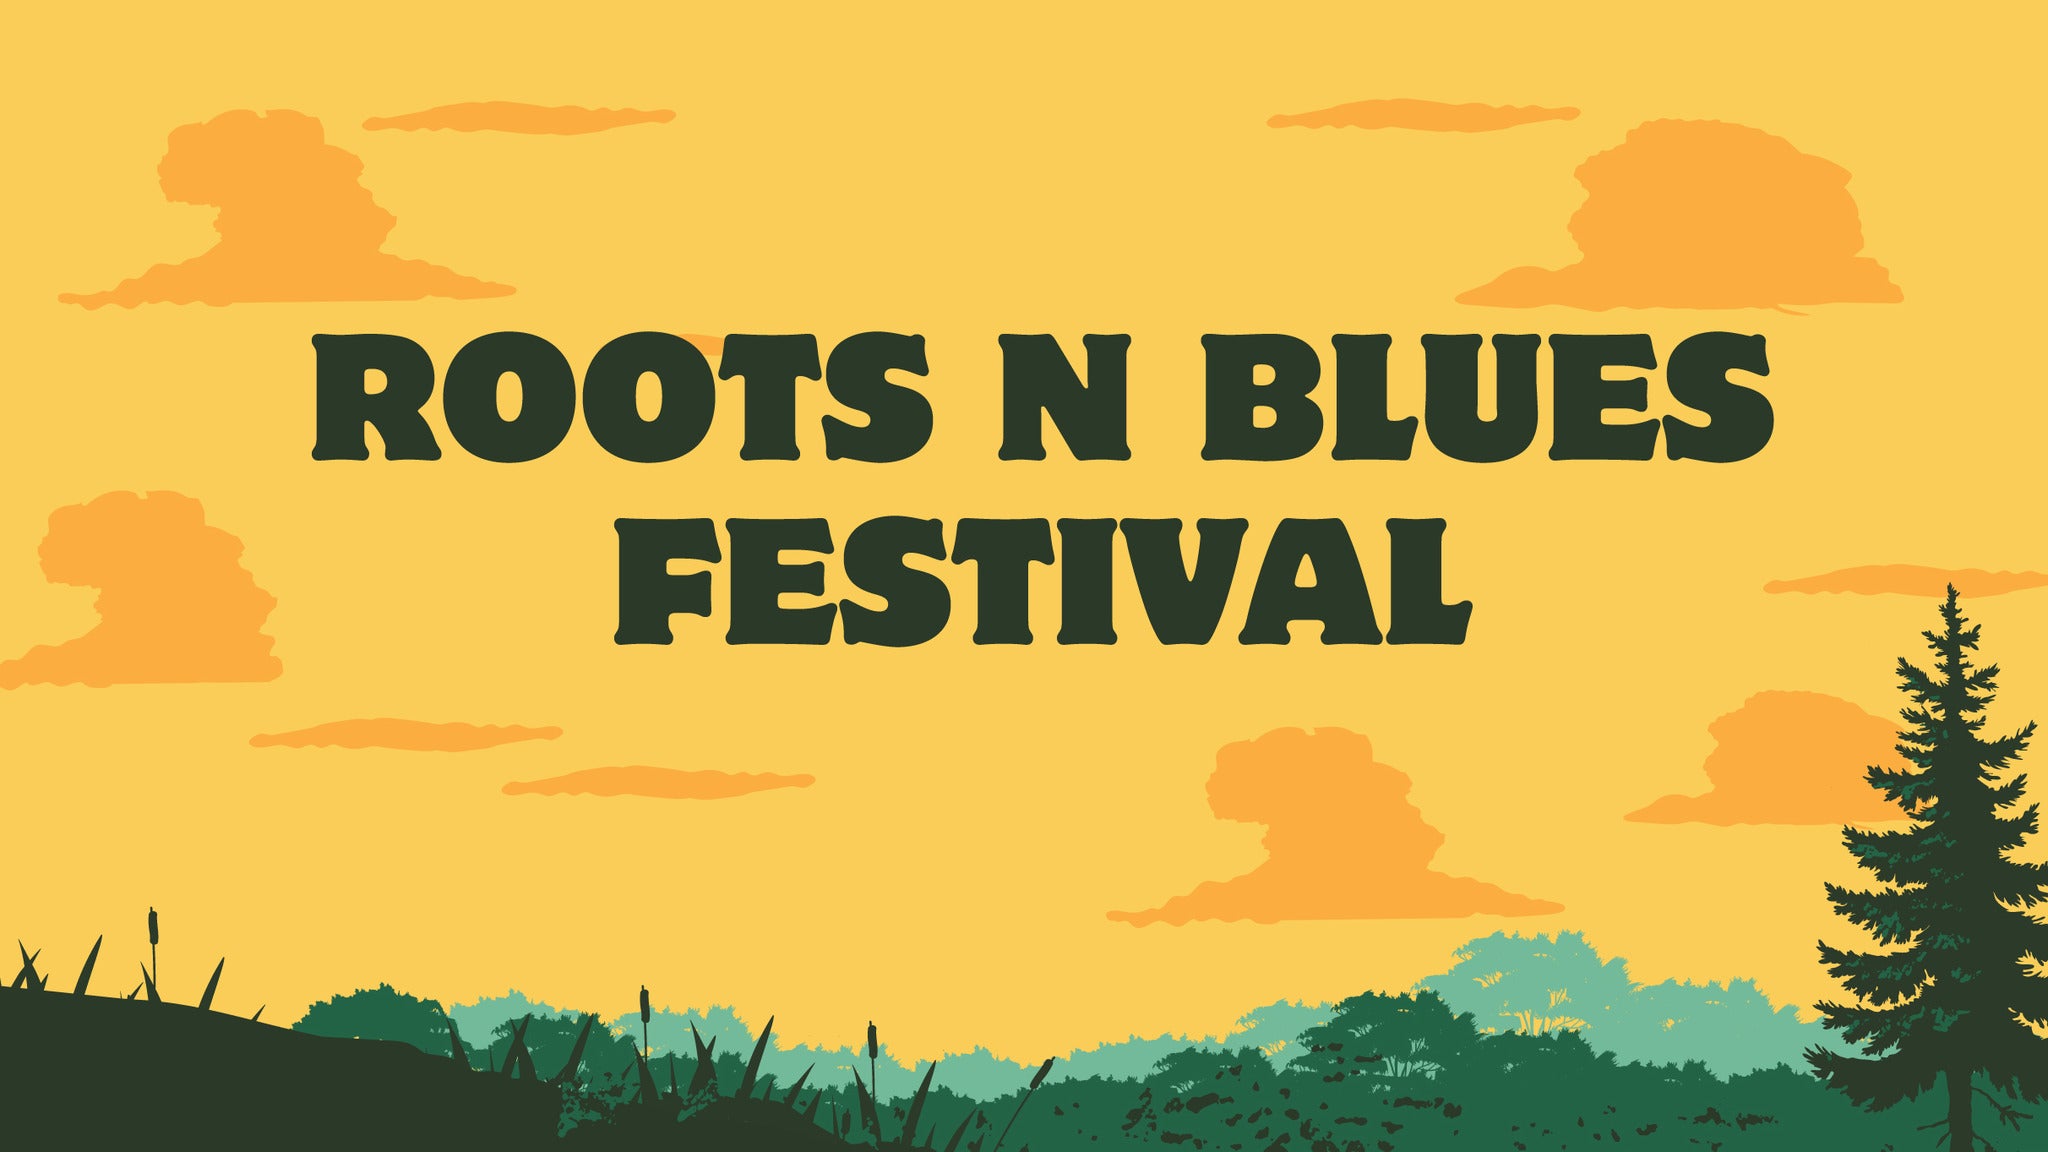 Roots N Blues Festival at Stephens Lake Park